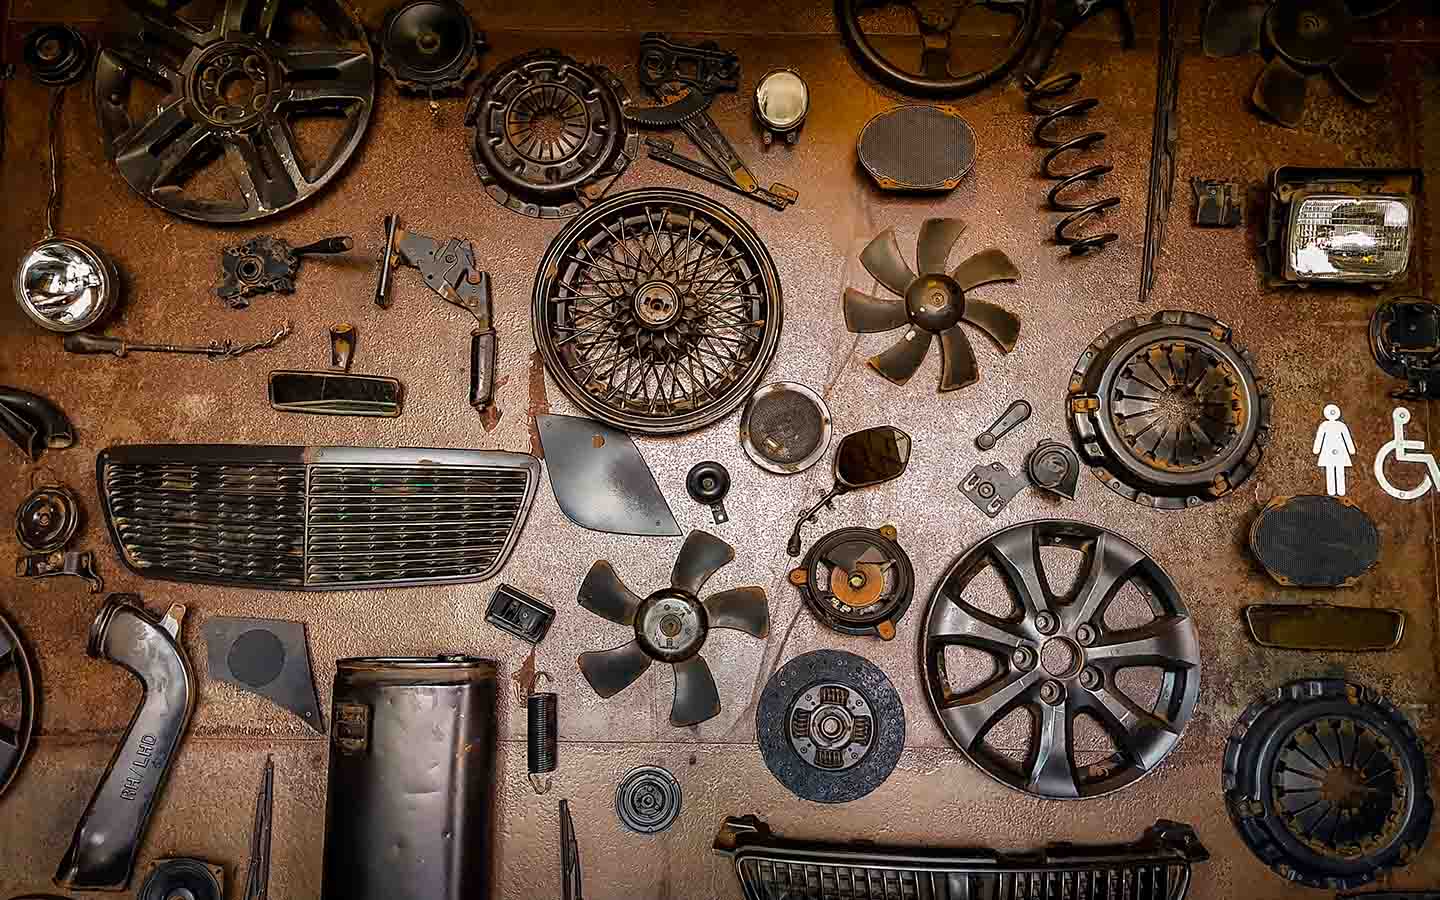 Car parts have selling value and owners can sell the parts independently